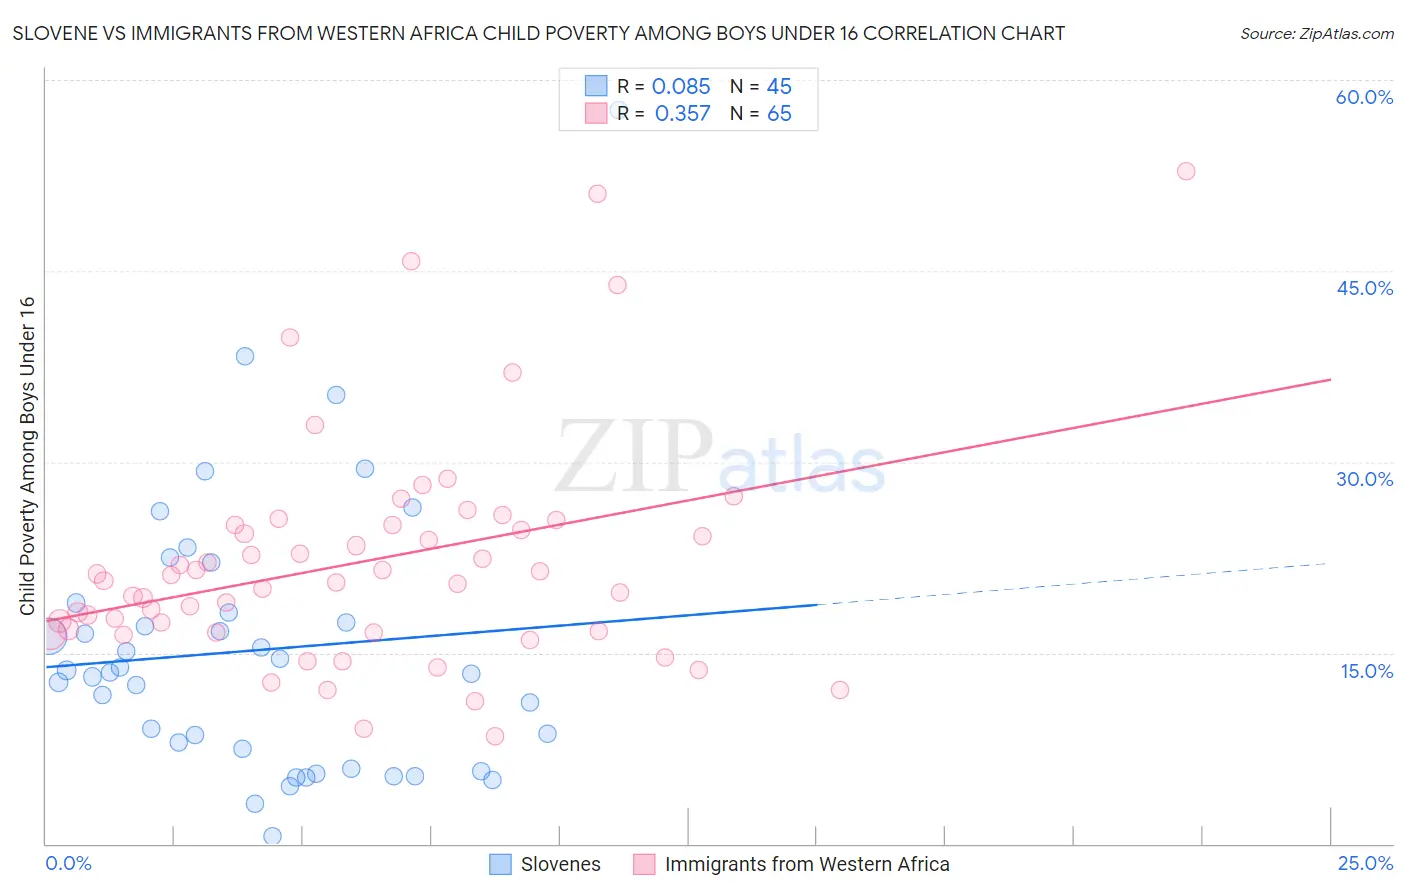 Slovene vs Immigrants from Western Africa Child Poverty Among Boys Under 16